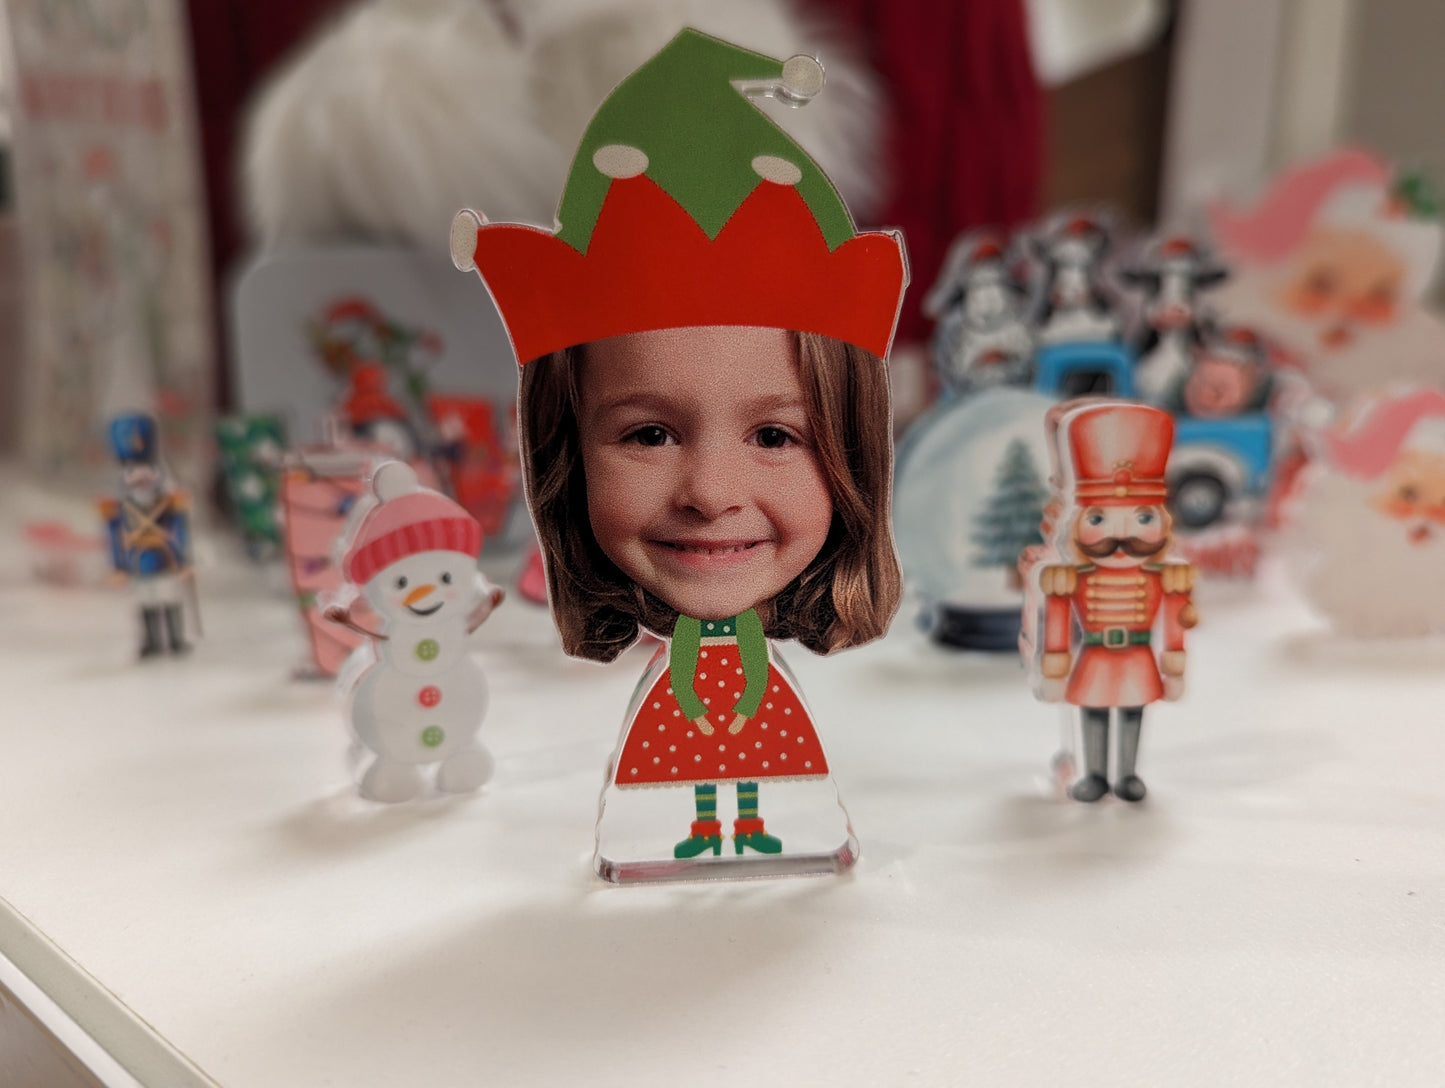 "Christmas" Your Photo - Snow globes, Desk buddies, ornaments and more